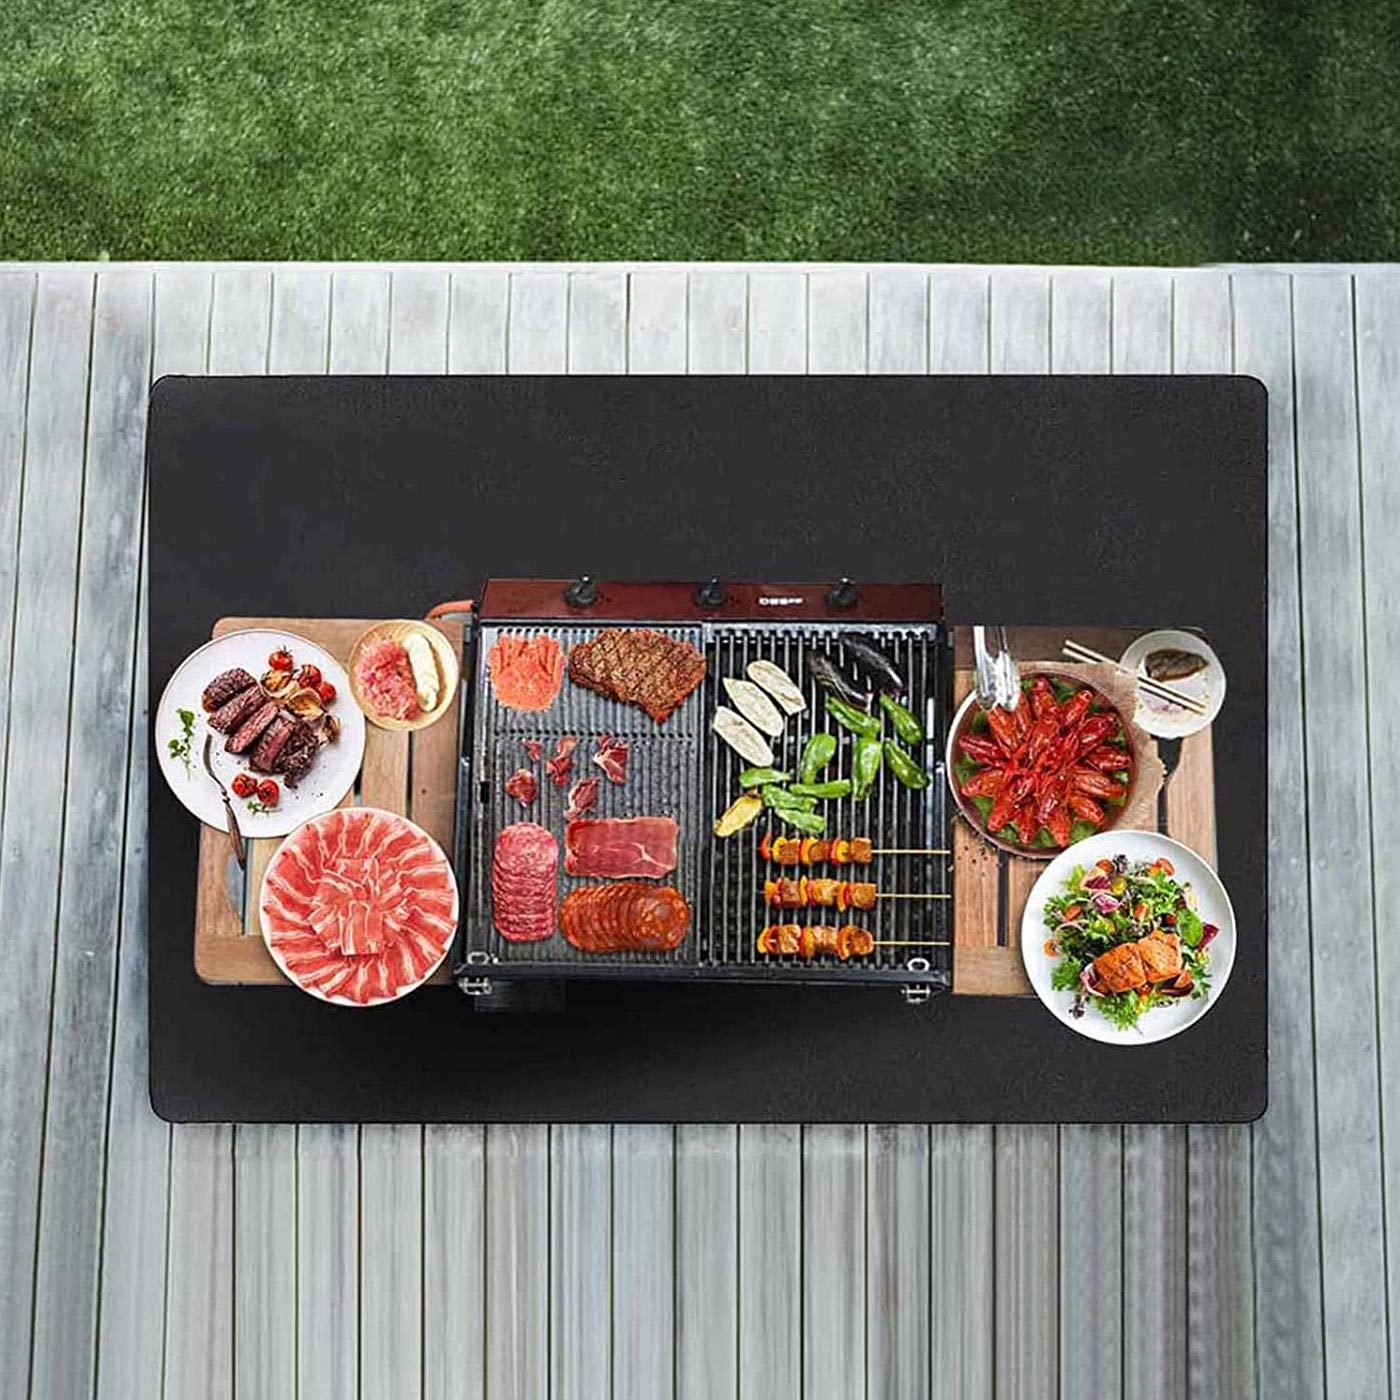 Save On Cleanup With These Versatile Grill Mats FT Via Amazon.com  ?fit=700